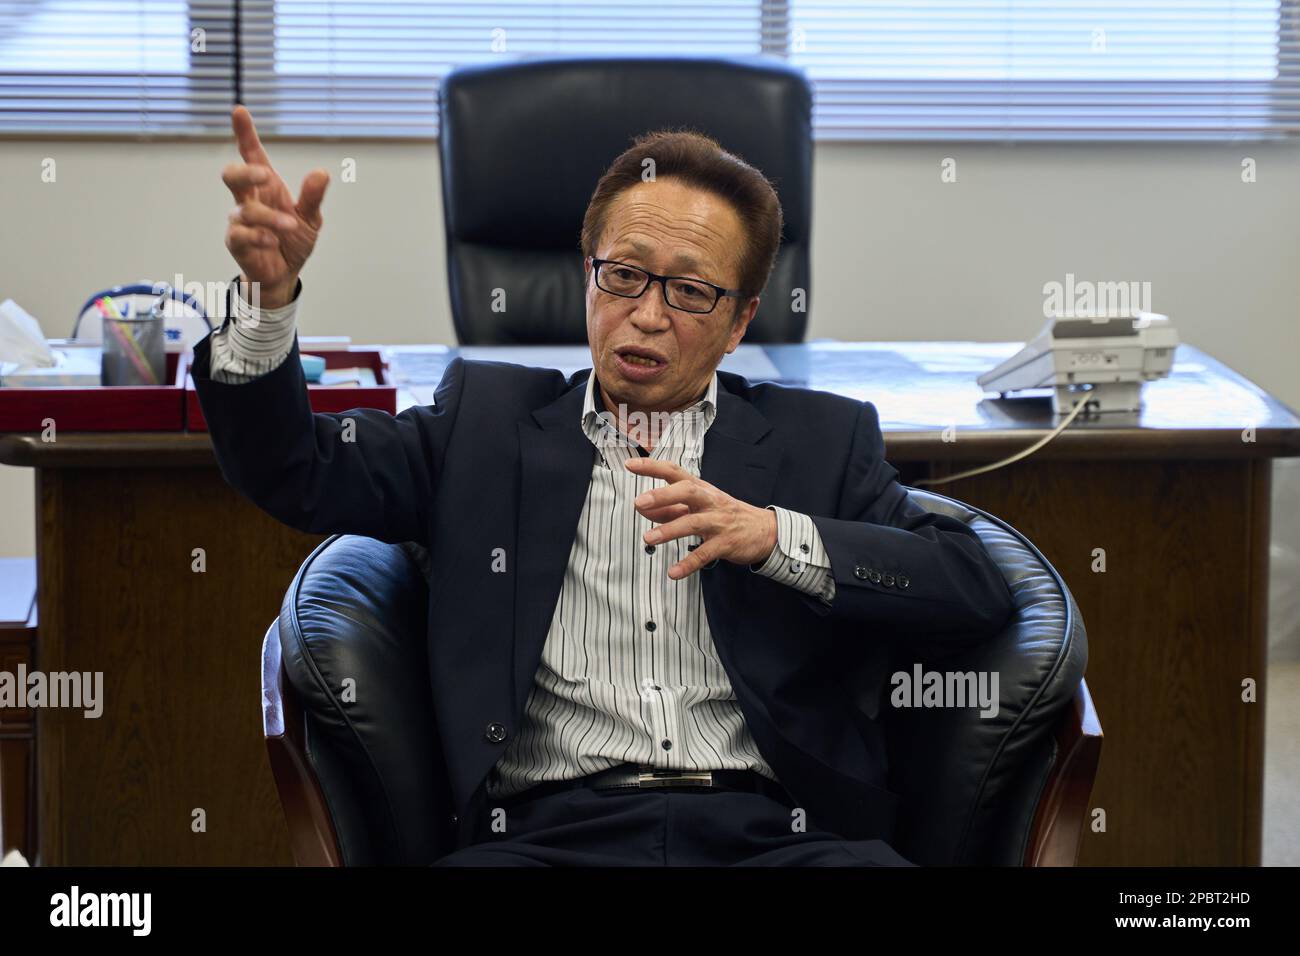 (230313) -- FUKUSHIMA, March 13, 2023 (Xinhua) -- Toshimitsu Konno, head of Fukushima prefecture's Soma Futaba Fisheries Cooperative Association, gives an interview in Soma City, Fukushima Prefecture, Japan, March 8, 2023. Struck by a magnitude-9.0 earthquake and ensuing tsunami that hit Japan's northeast on March 11, 2011, the power plant suffered core meltdowns, resulting in a level-7 nuclear accident, the highest on the International Nuclear and Radiological Event Scale. Twelve years after the 2011 accident traumatized Fukushima's fishing industry, local fishermen are still struggling for Stock Photo